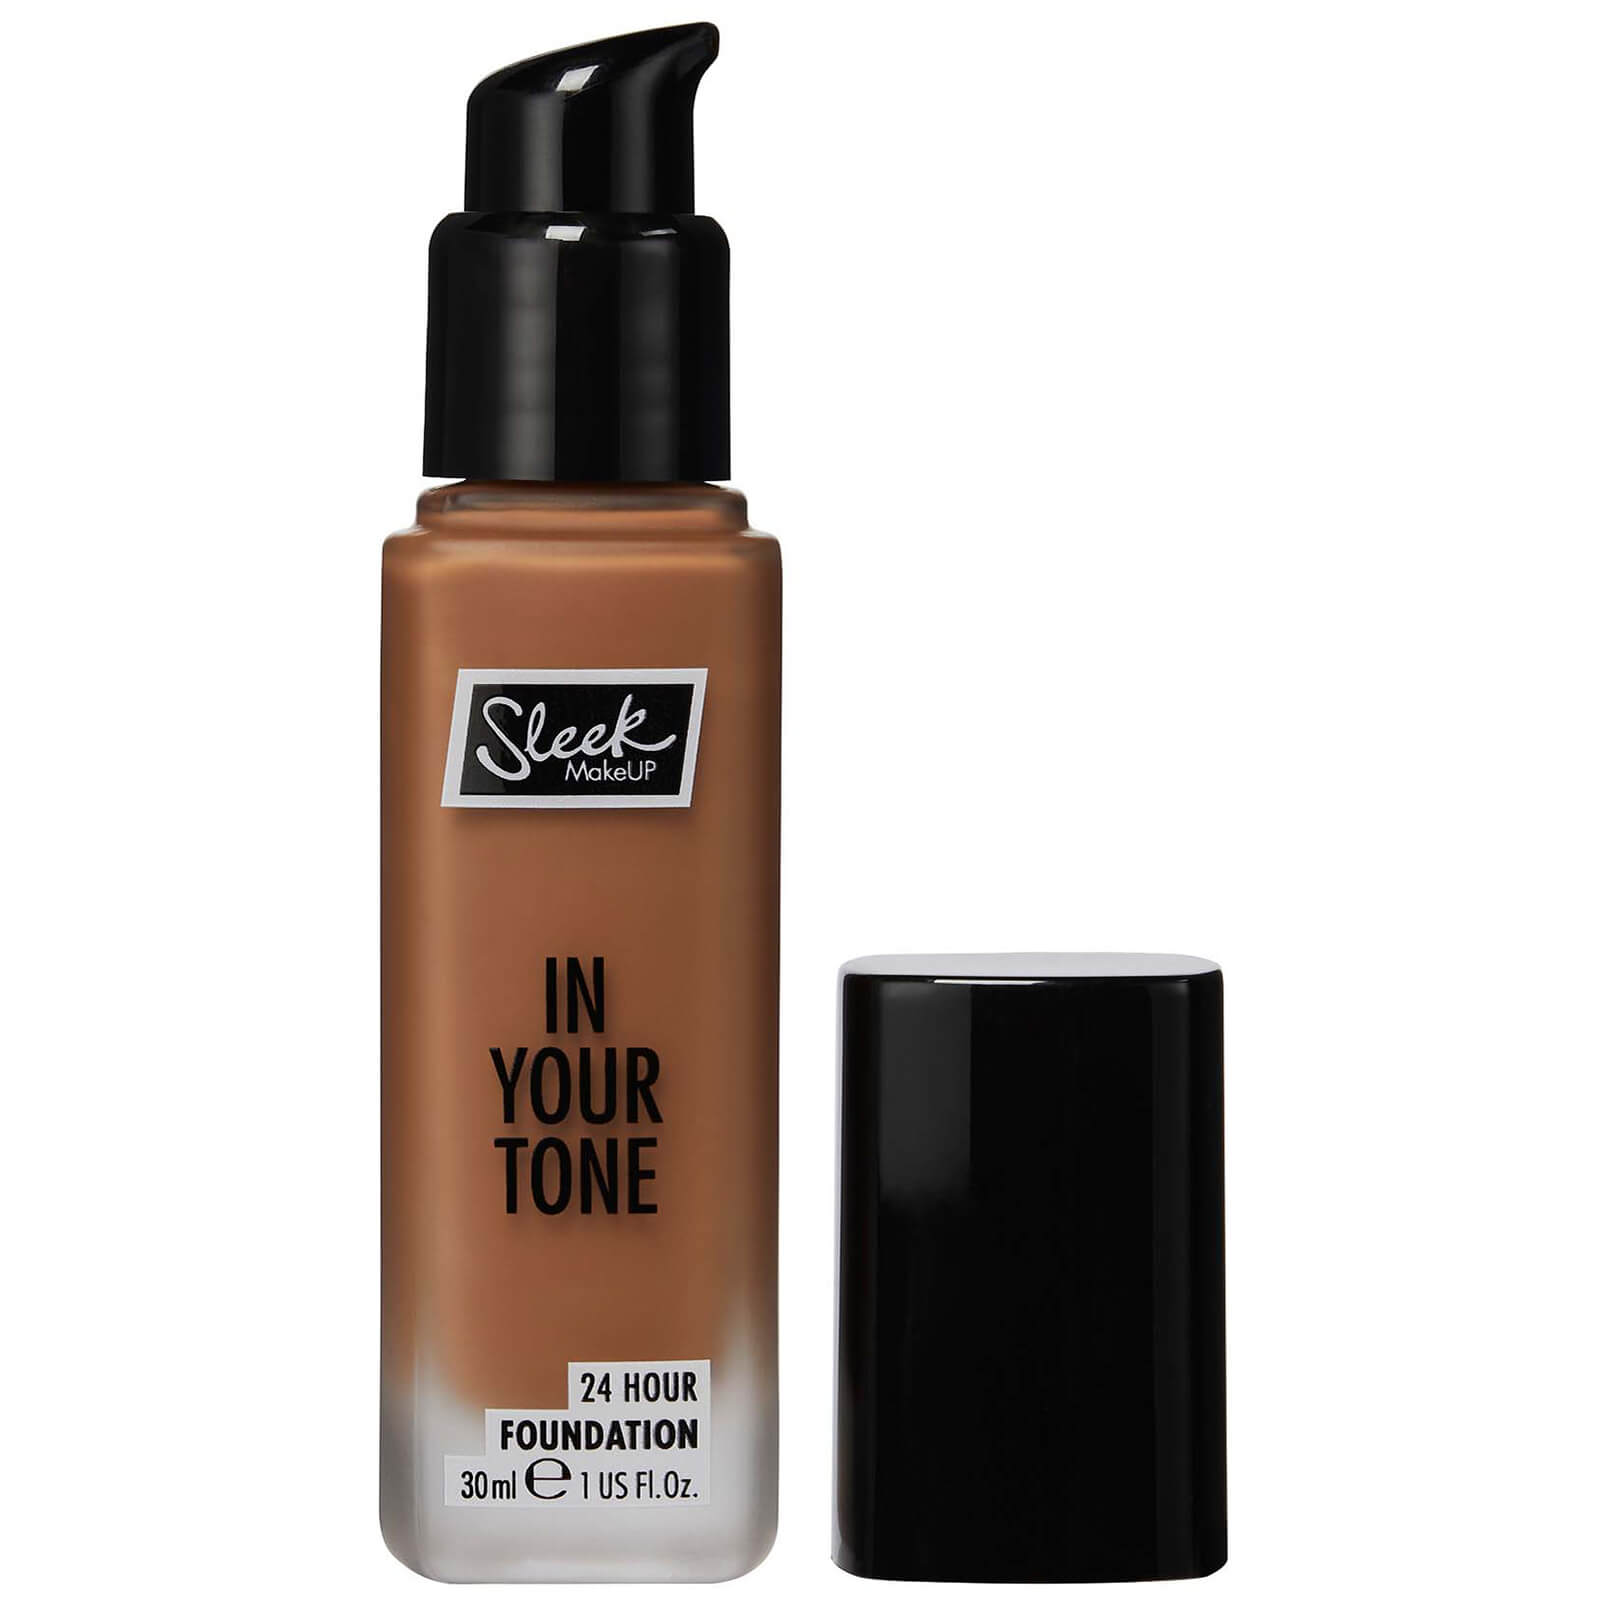 Sleek MakeUP in Your Tone 24 Hour Foundation 30ml (Various Shades) - 10N